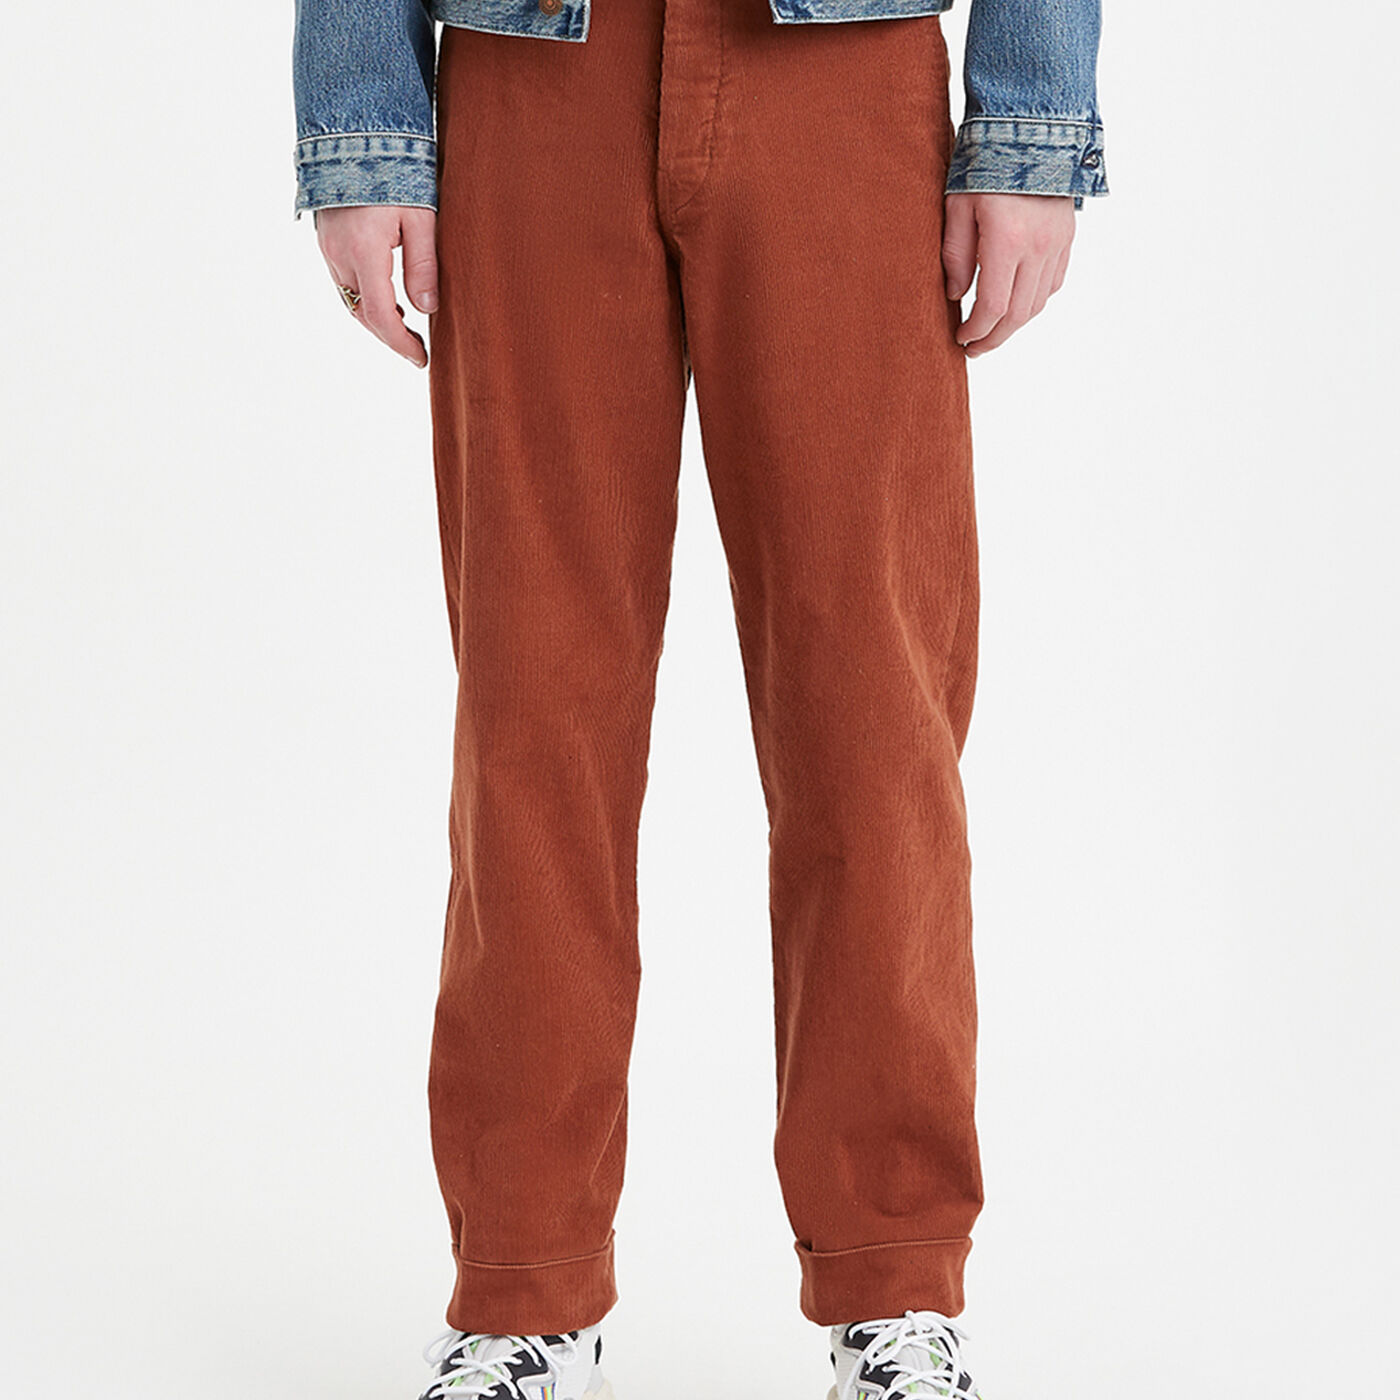 Levi's® 1919 Cords in Camel.